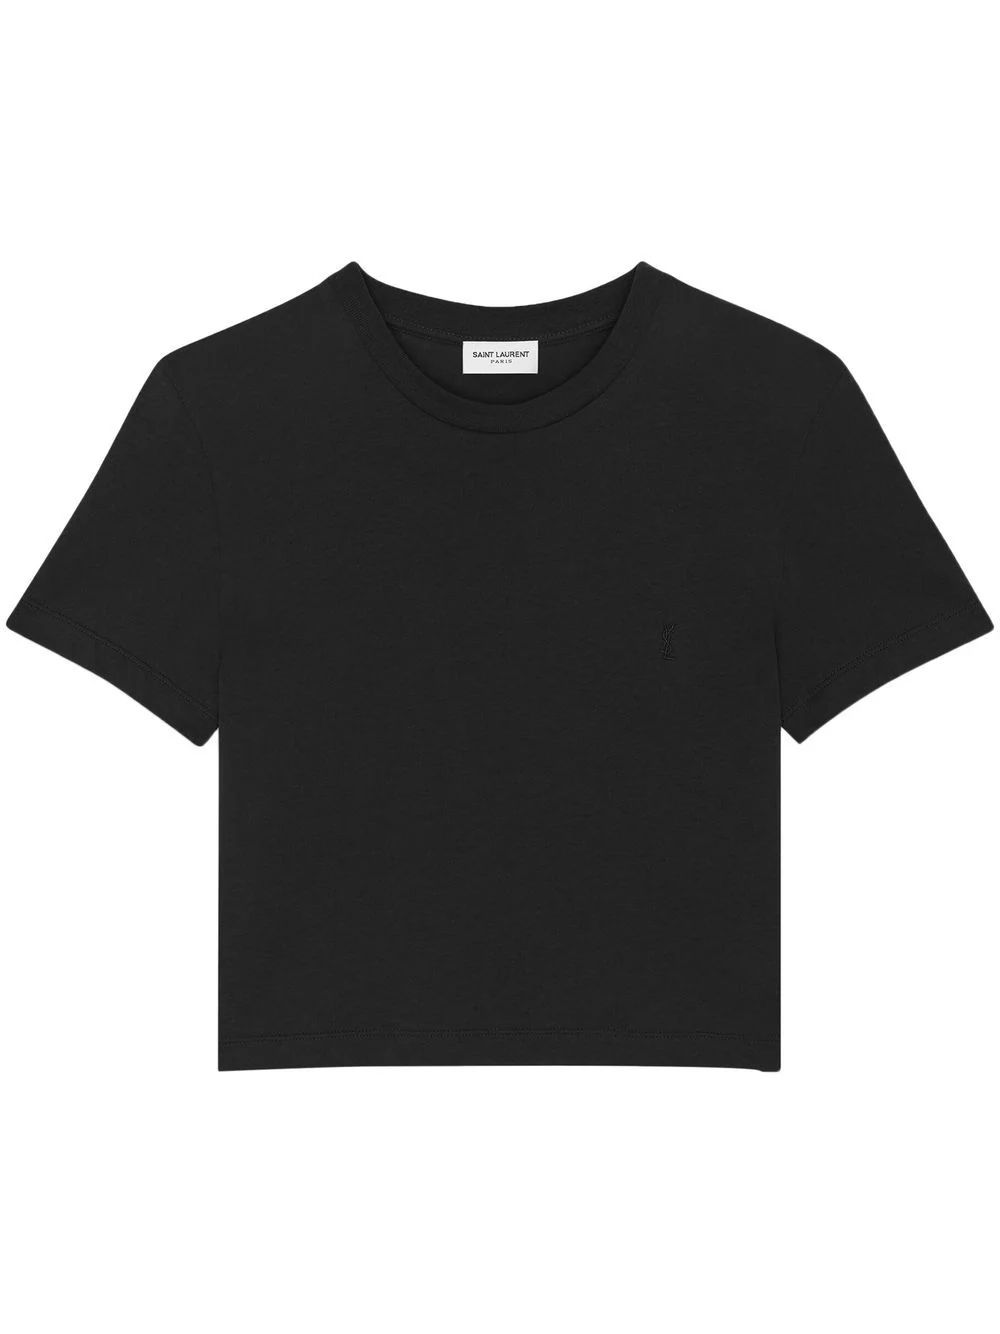 embroidered-logo cropped T-shirt | Farfetch Global